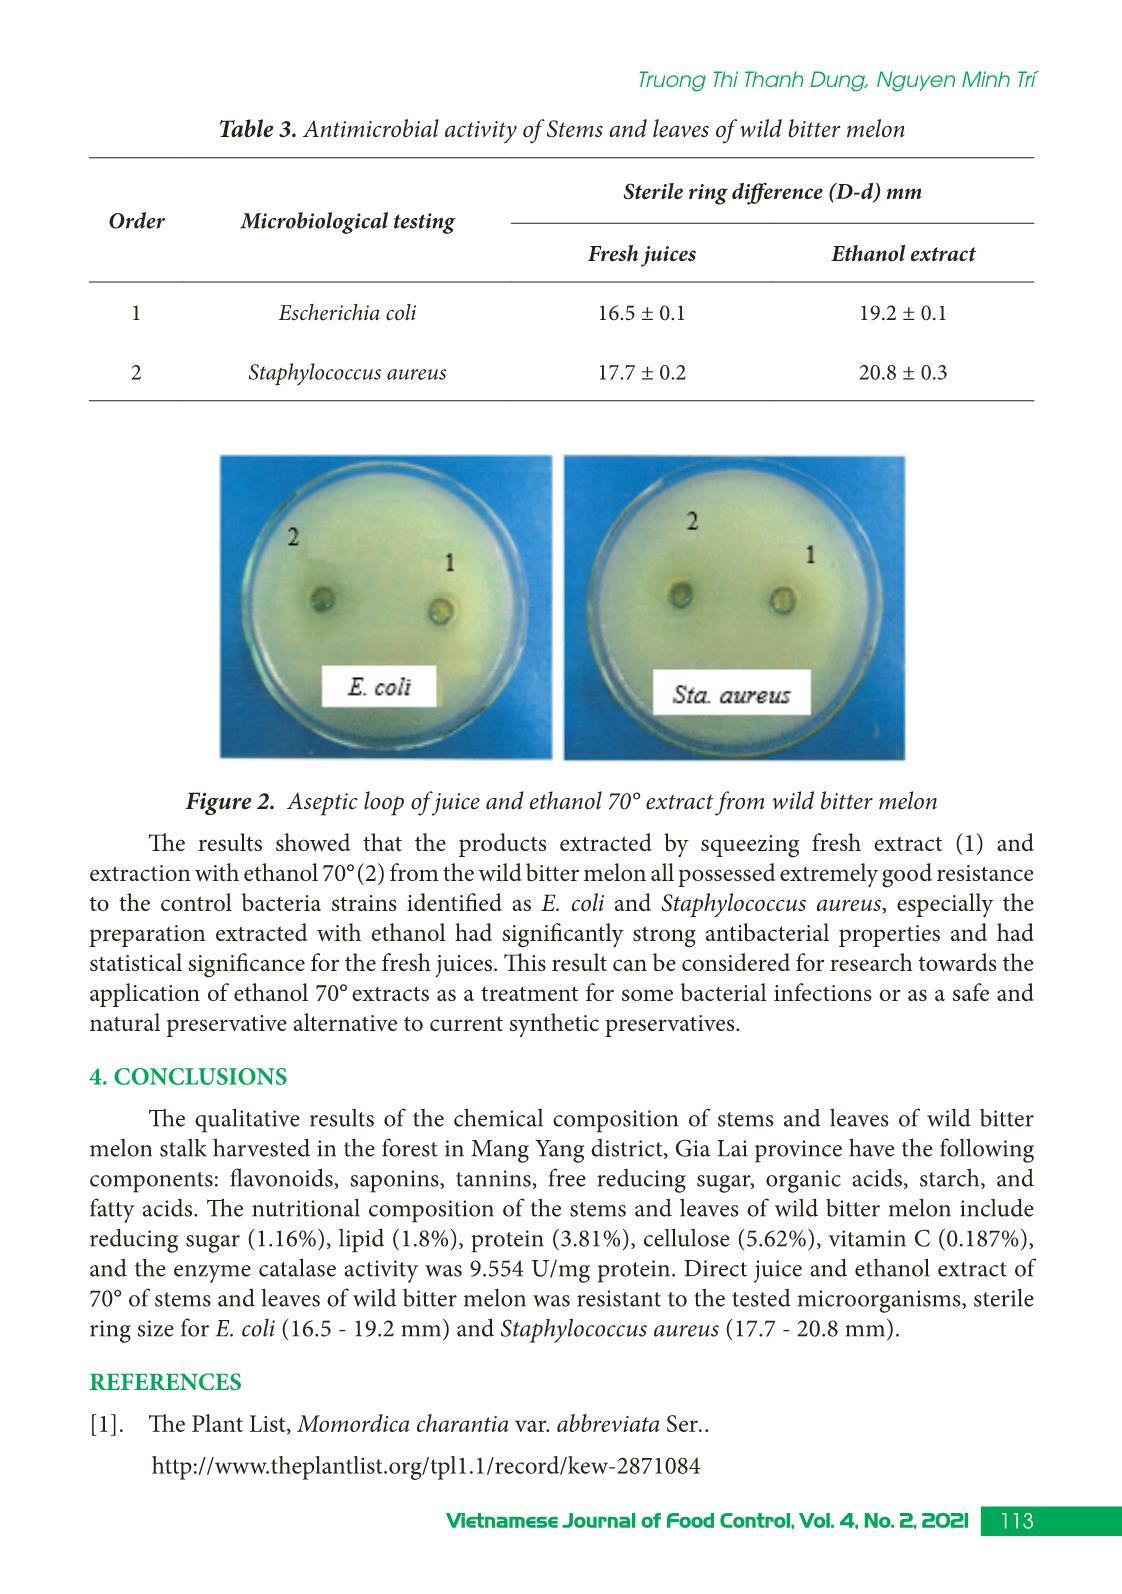 Biochemical compositions, antioxidant activity, and in vitro antibacterial activity of extract from wild bitter melon (momordica charantia var. abbreviata ser.) trang 5